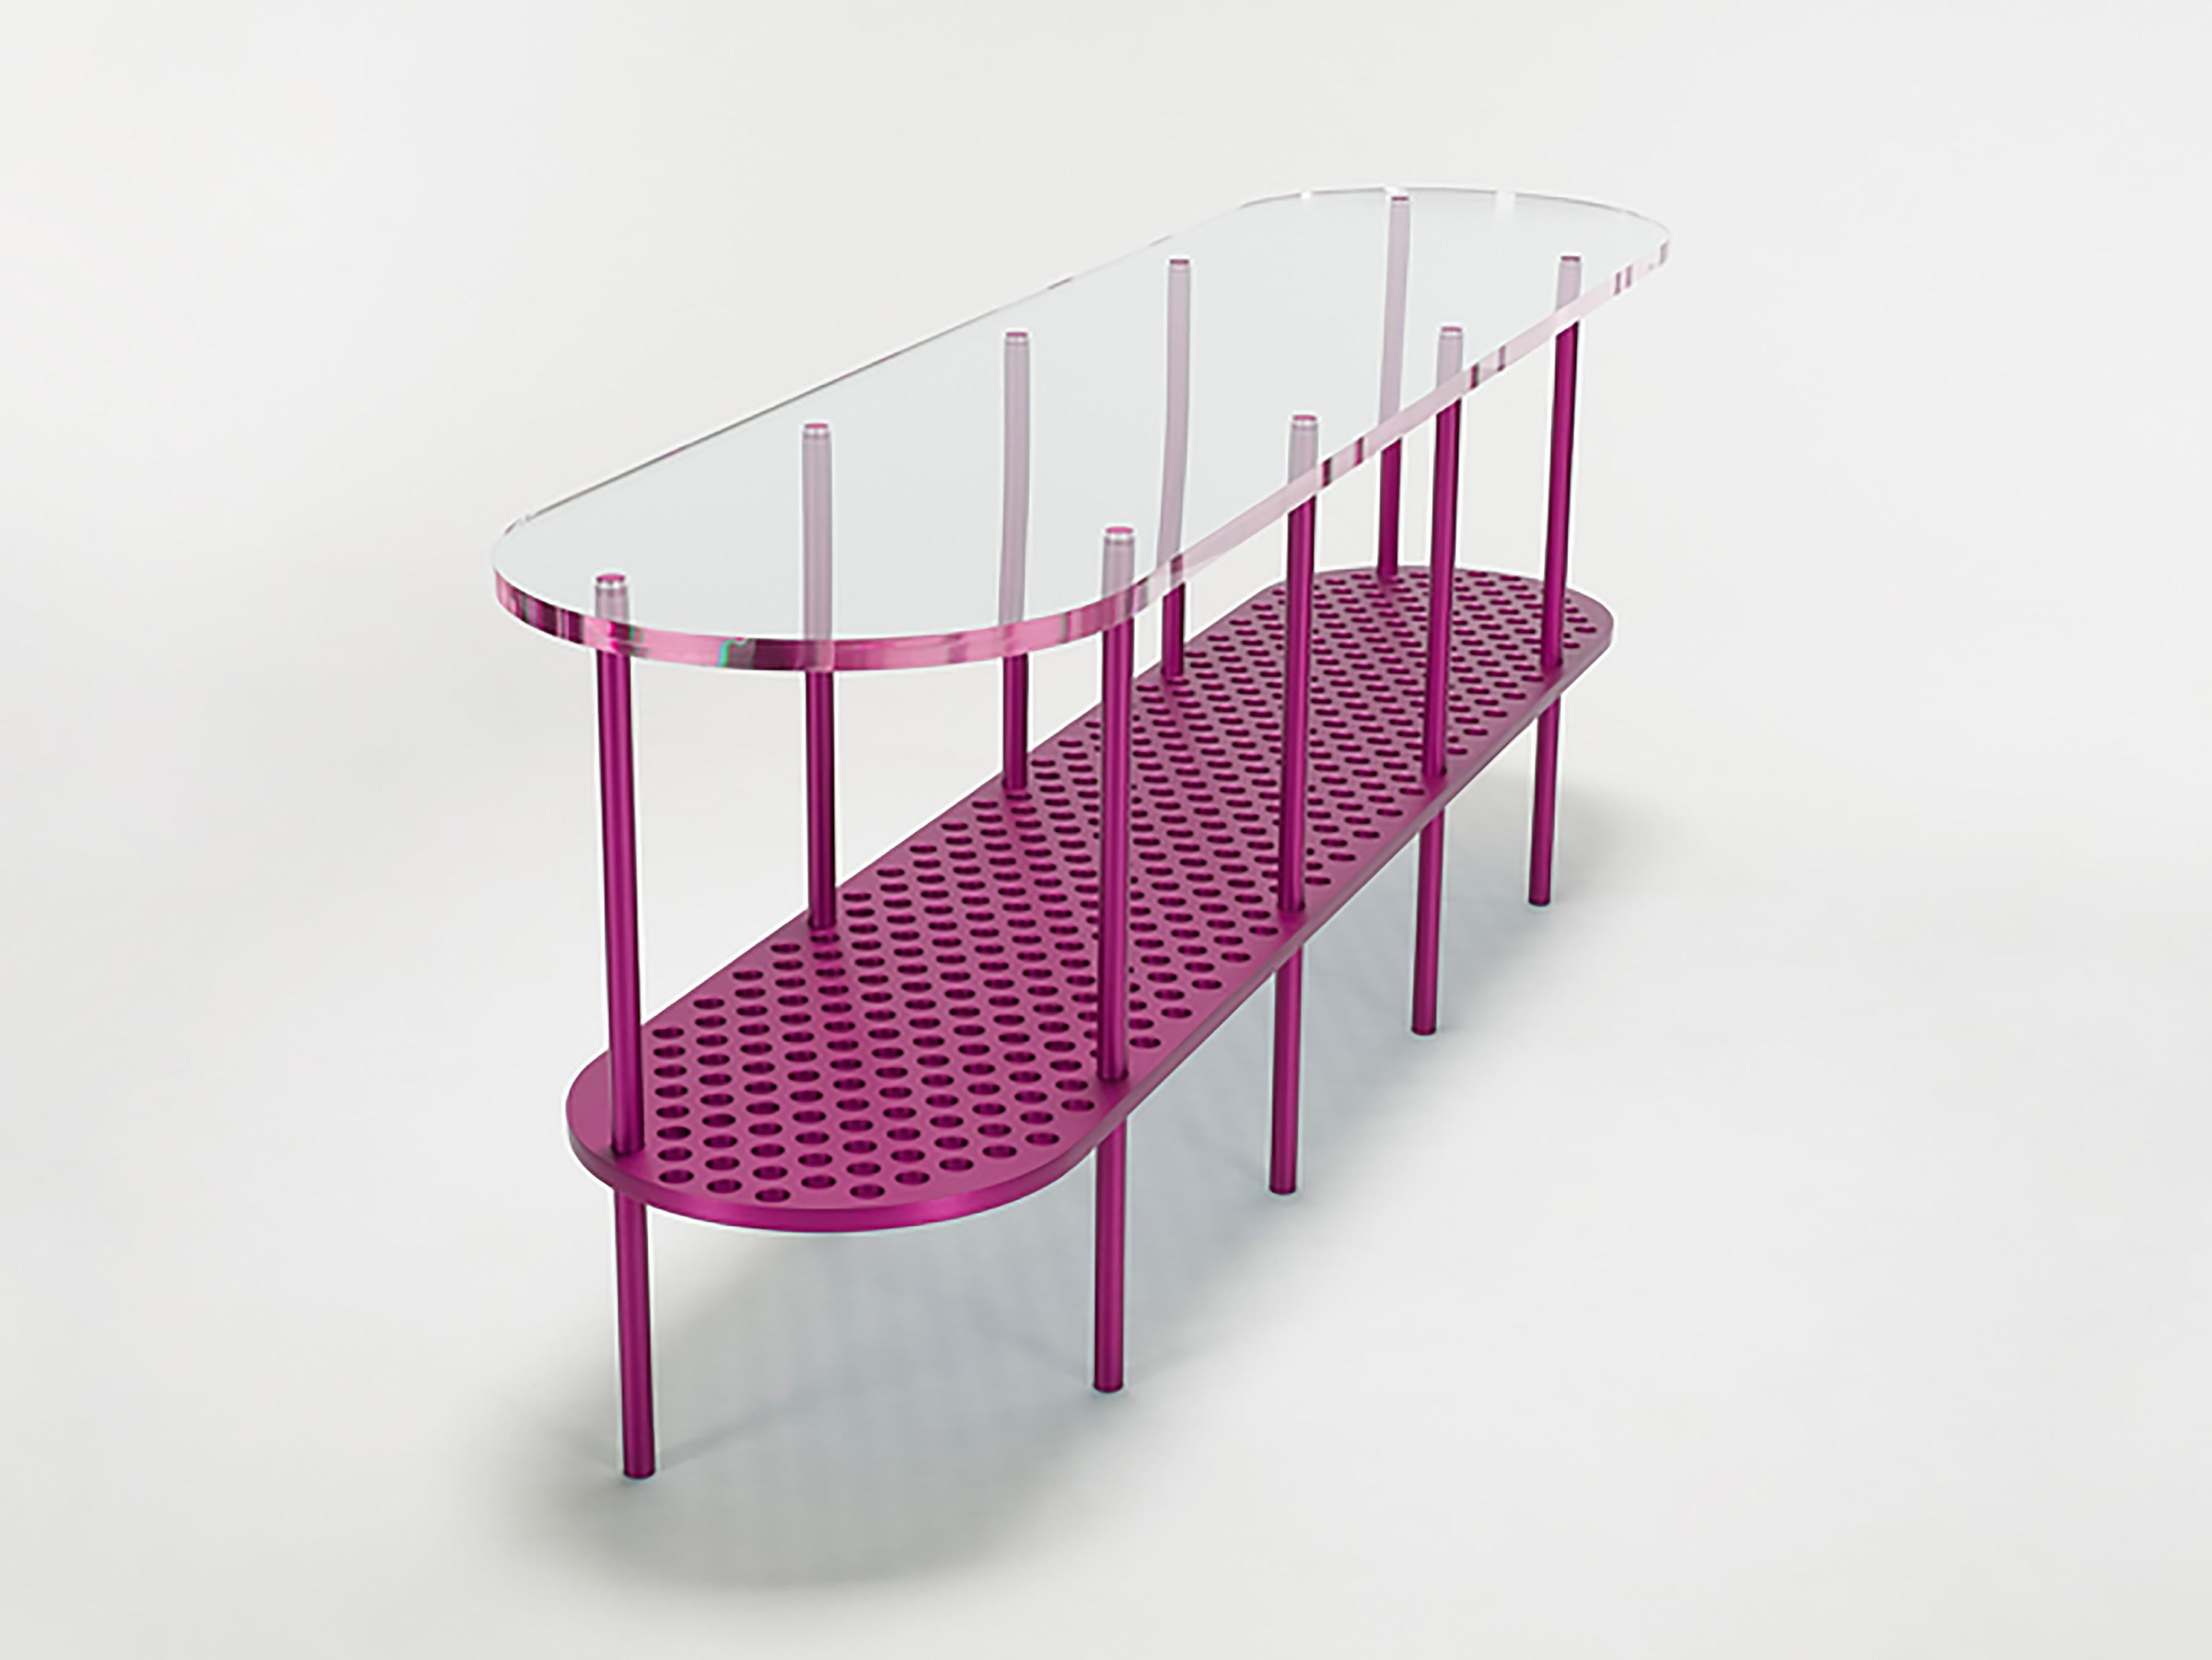 Anodized aluminum and acrylic console by Jonathan Nesci, designed exclusively for Design Miami, 2015. Edition of 6 + 2 AP, each in a unique color. Brushed and anodized milled aluminum plate and bar with polished acrylic top. This is the only green